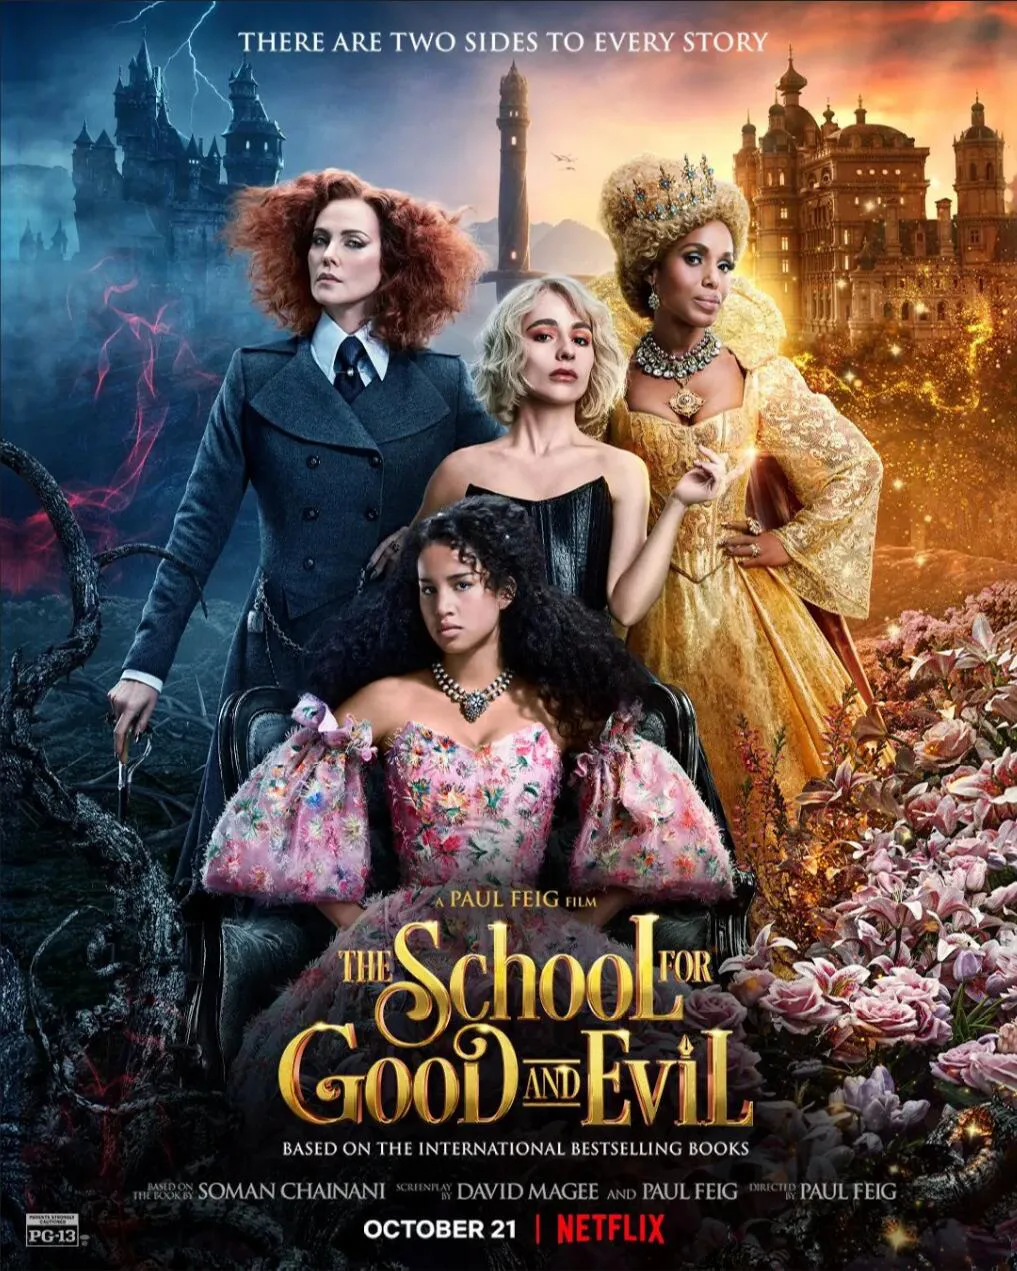 "The School for Good and Evil" Announces New Poster, Visual Style Gorgeous Contrast | FMV6